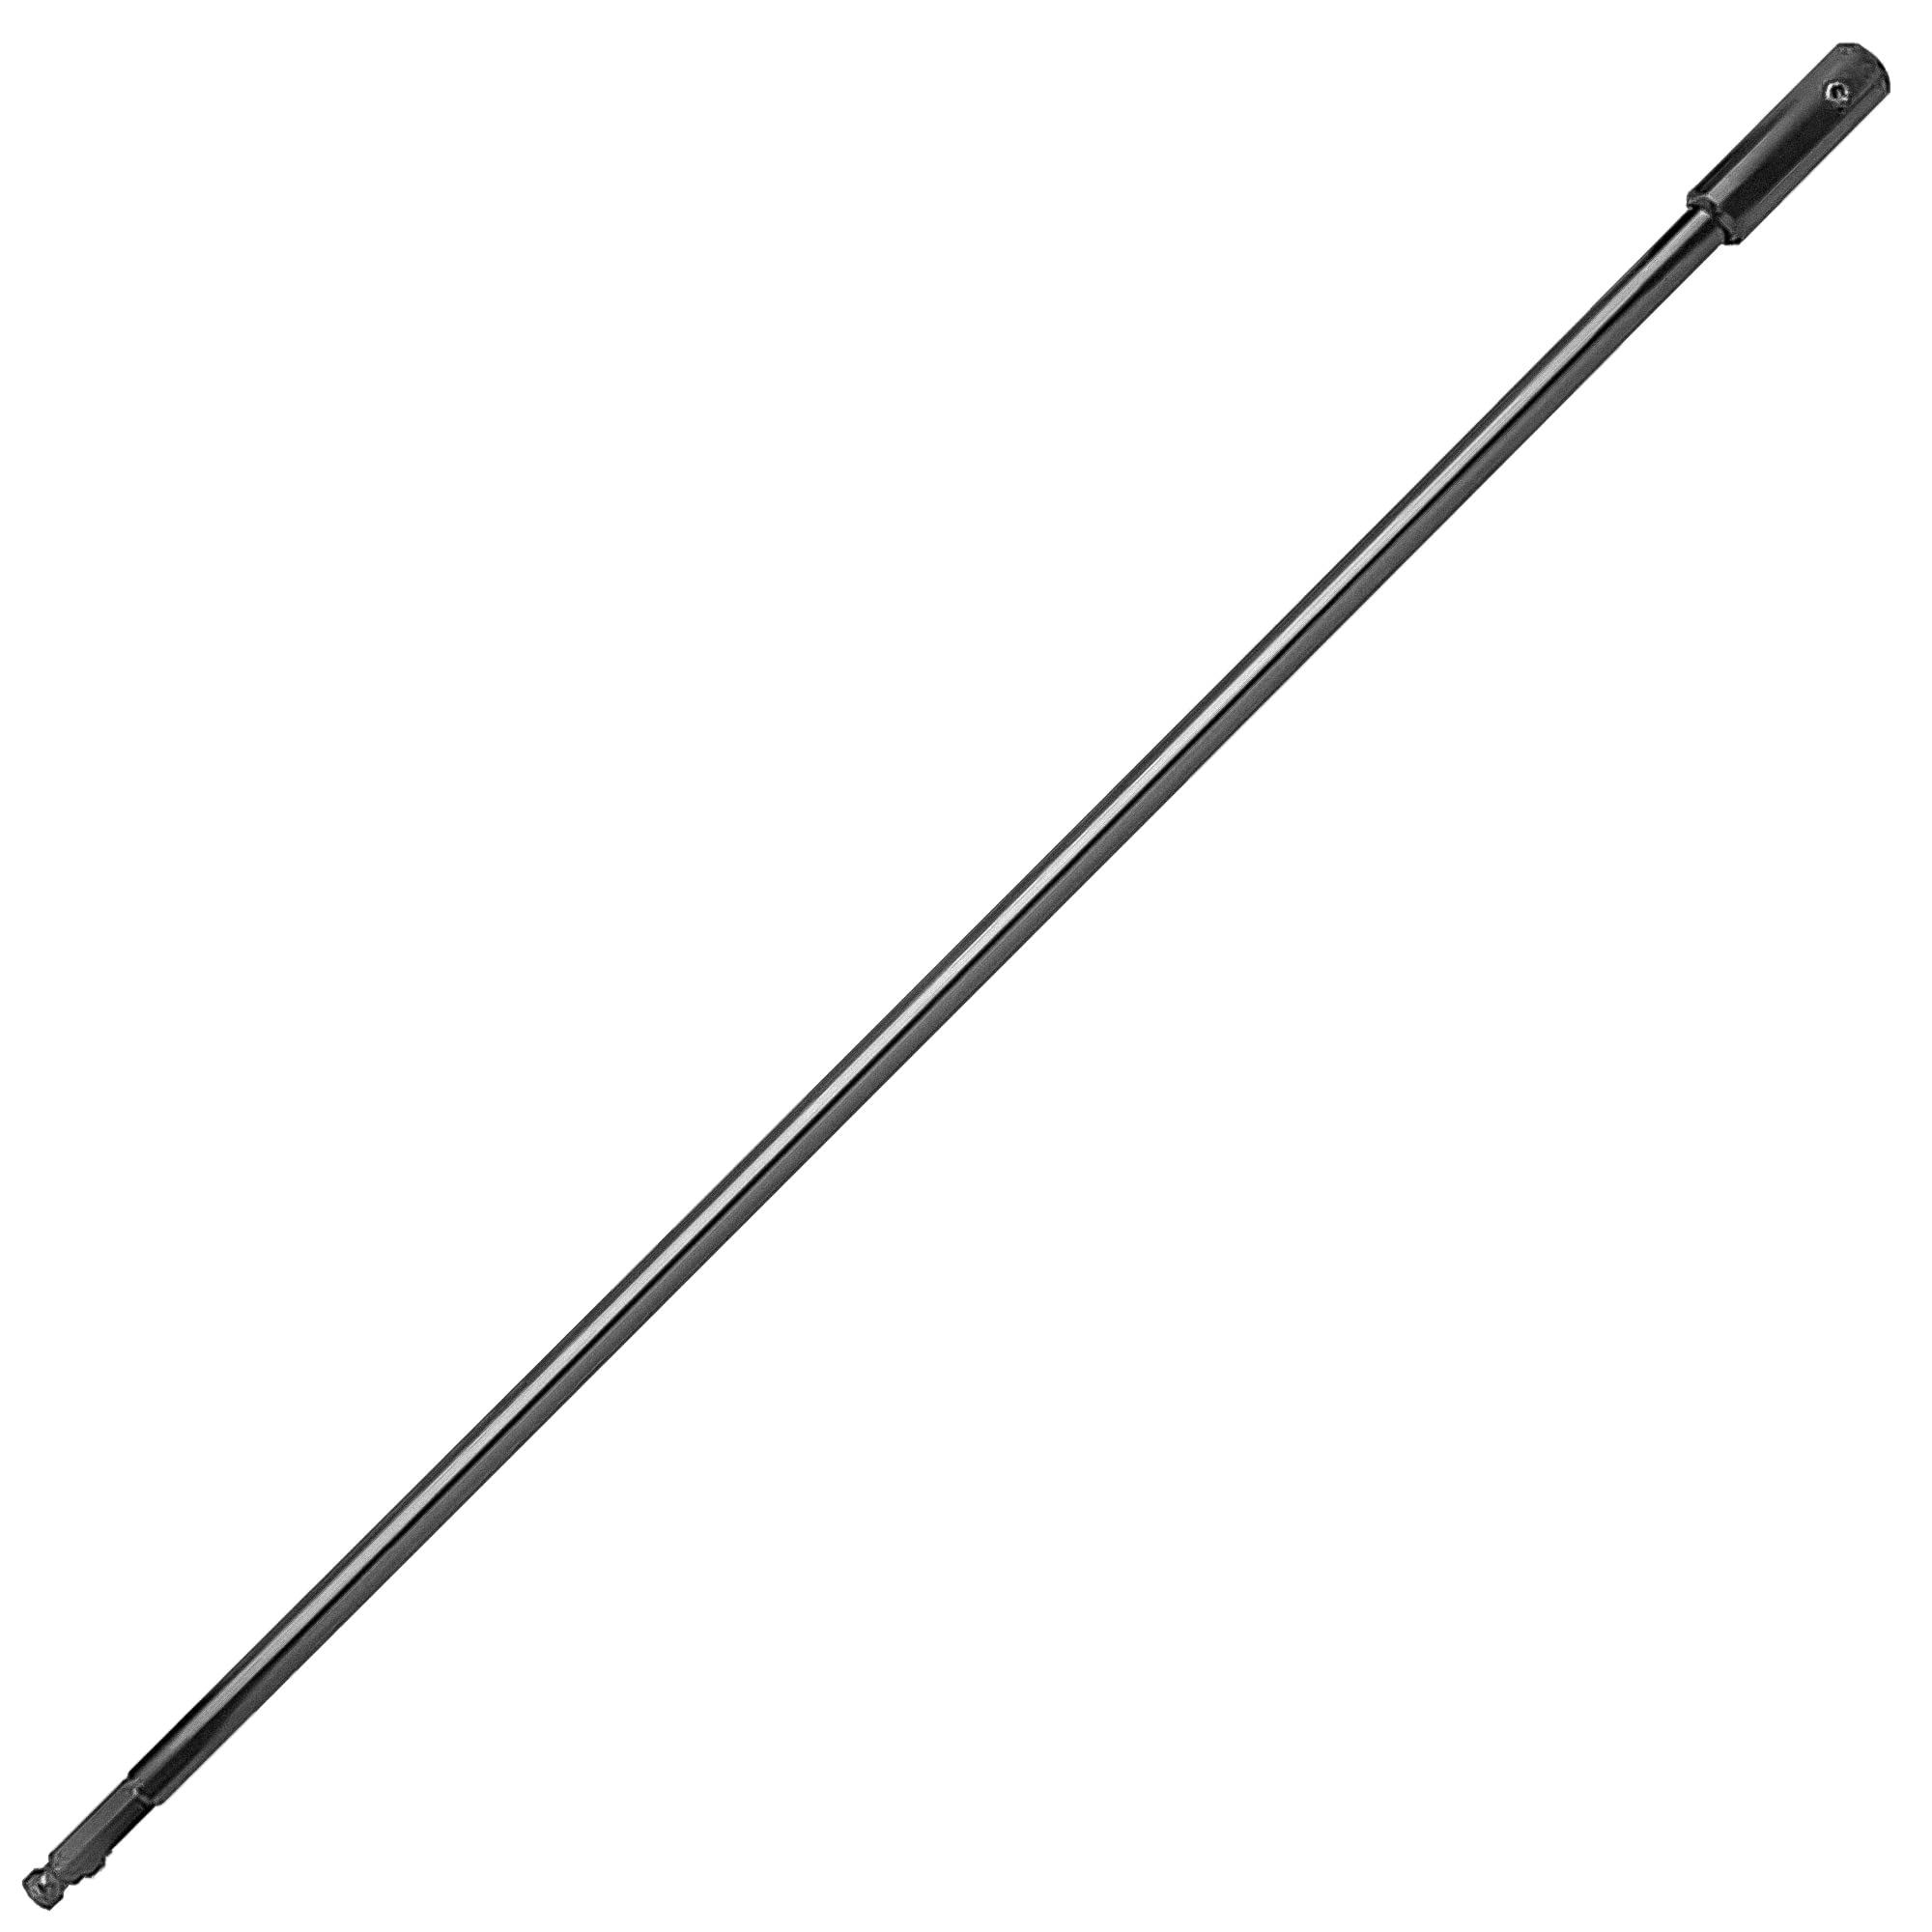 Fortool 48-28-4016 24-Inch Long 7/16-Inch Diameter Hex Shank Bit Extension For Milwaukee Tools, Drilling With Selfeed Bits, Auger Bits, Holes Saws & Anything With 7/16-Inch Arbor